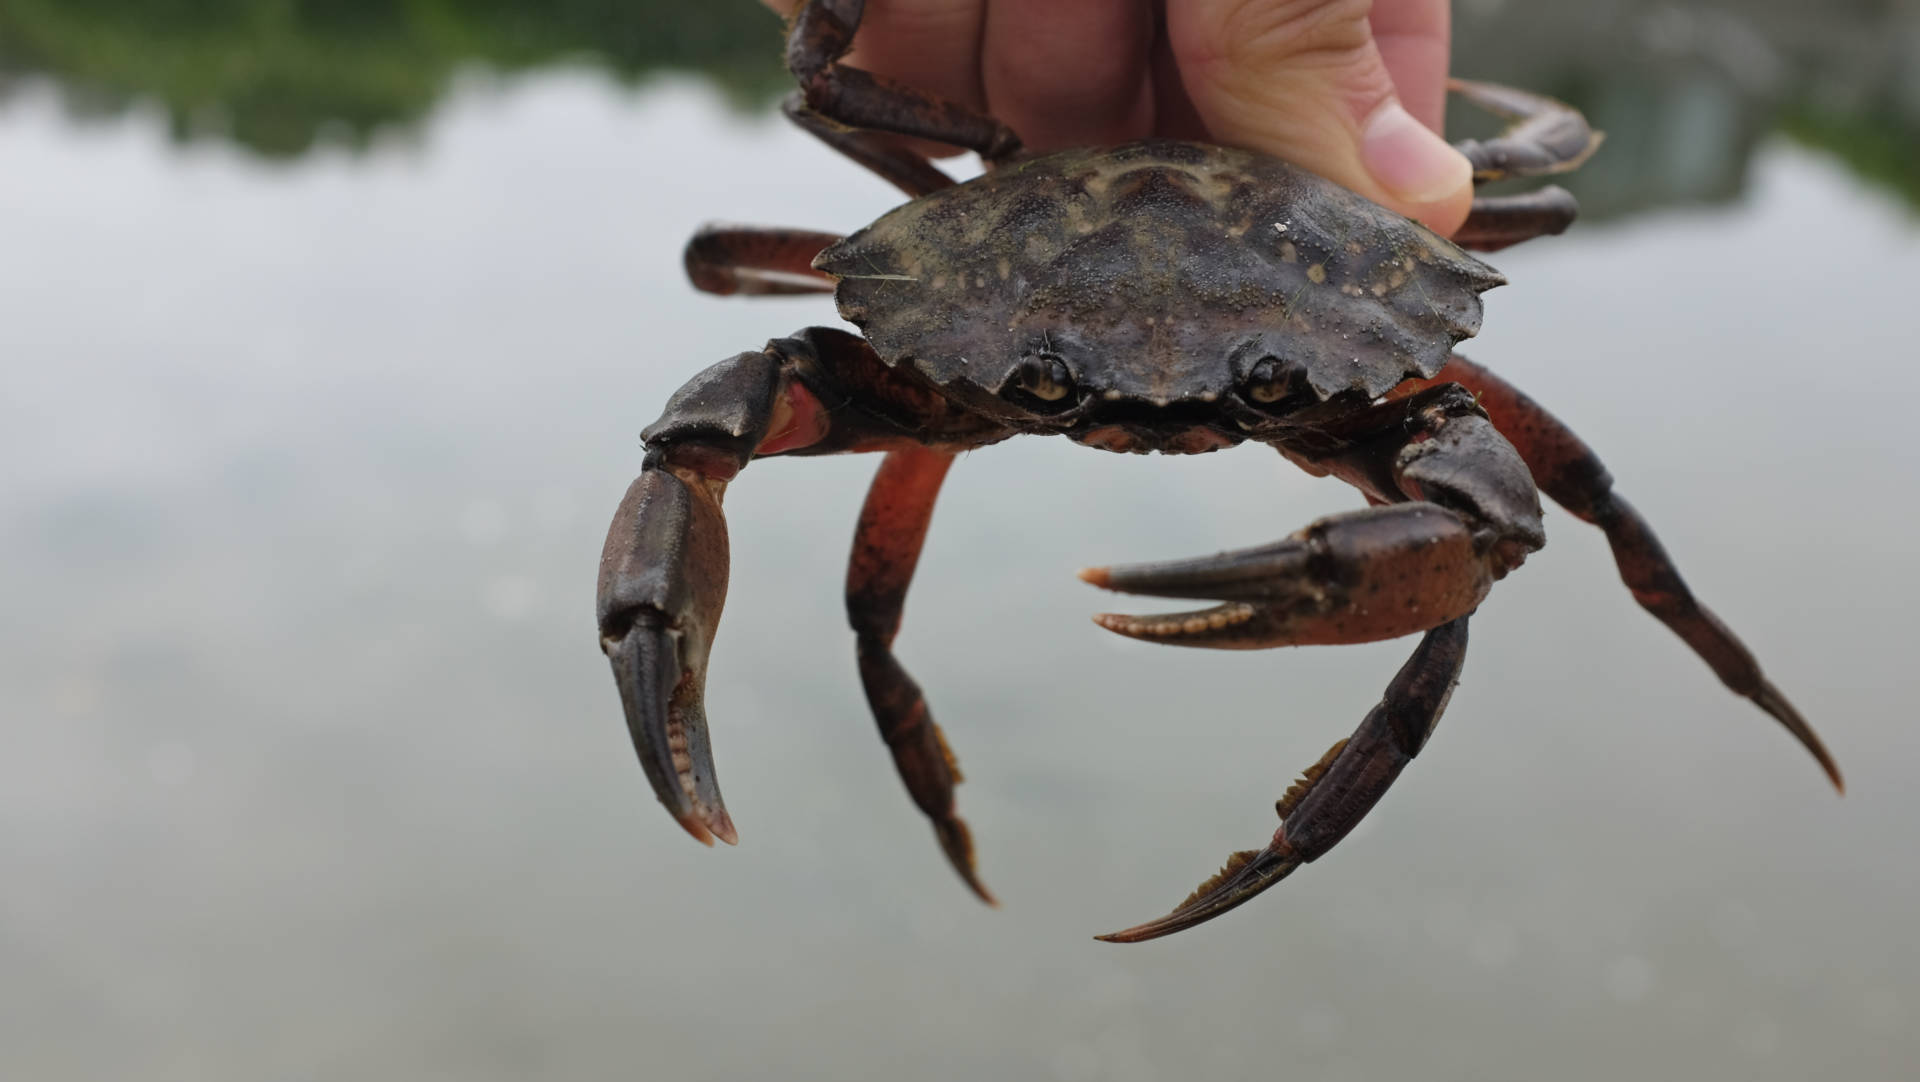 One of the roughly 10,000 invasive European green crabs removed from Seadrift Lagoon this summer by the Green Crab Project. Peter Arcuni/KQED